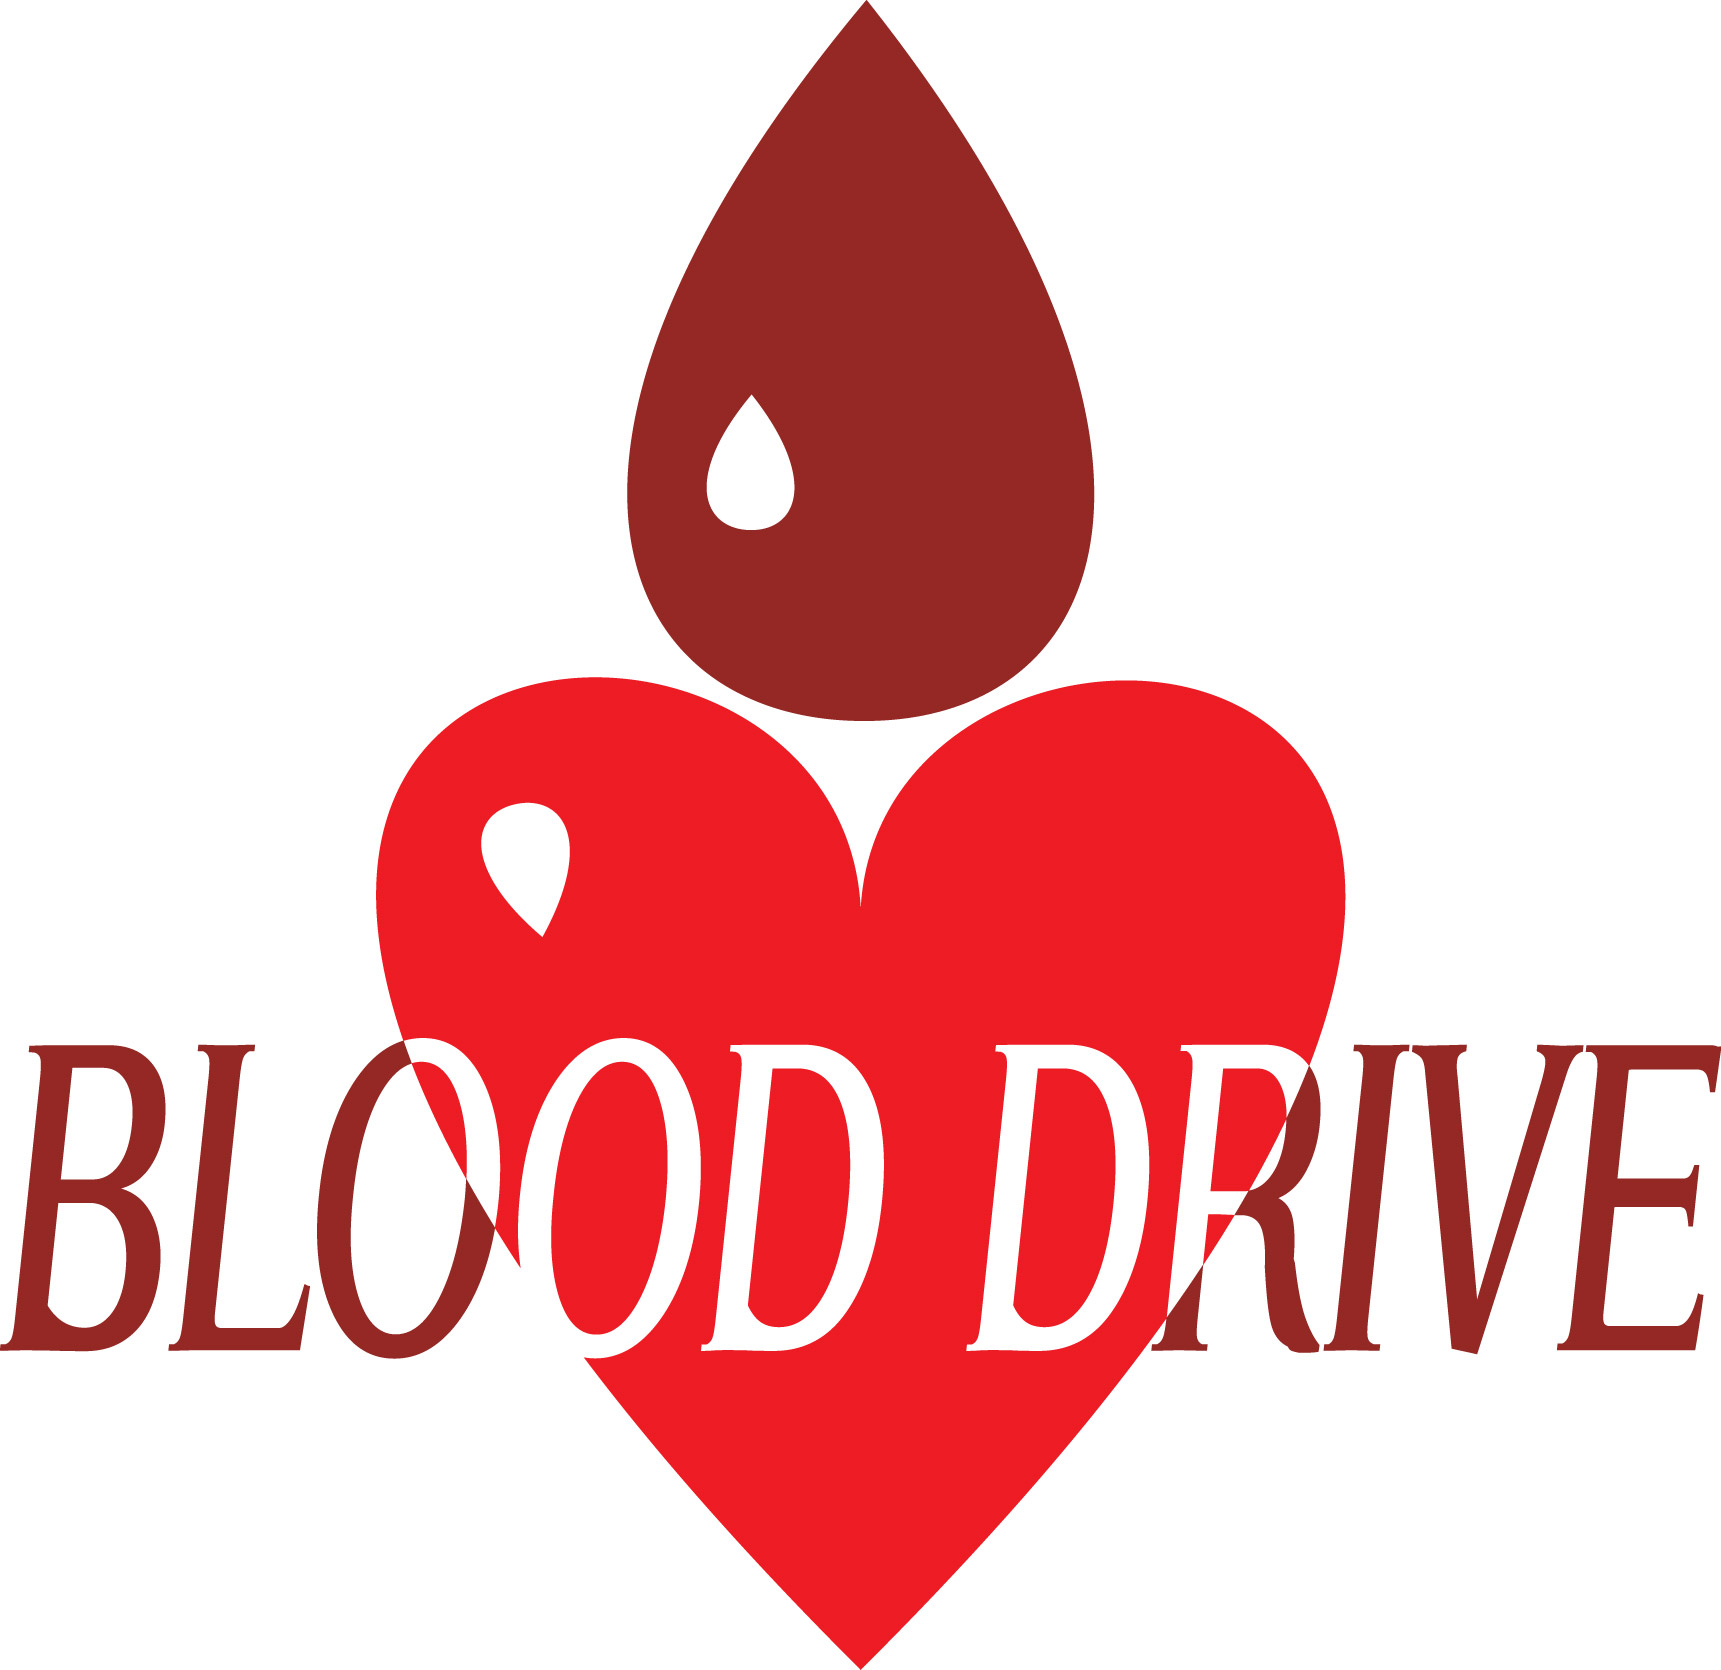 36 Blood Drive Images   Free Cliparts That You Can Download To You    